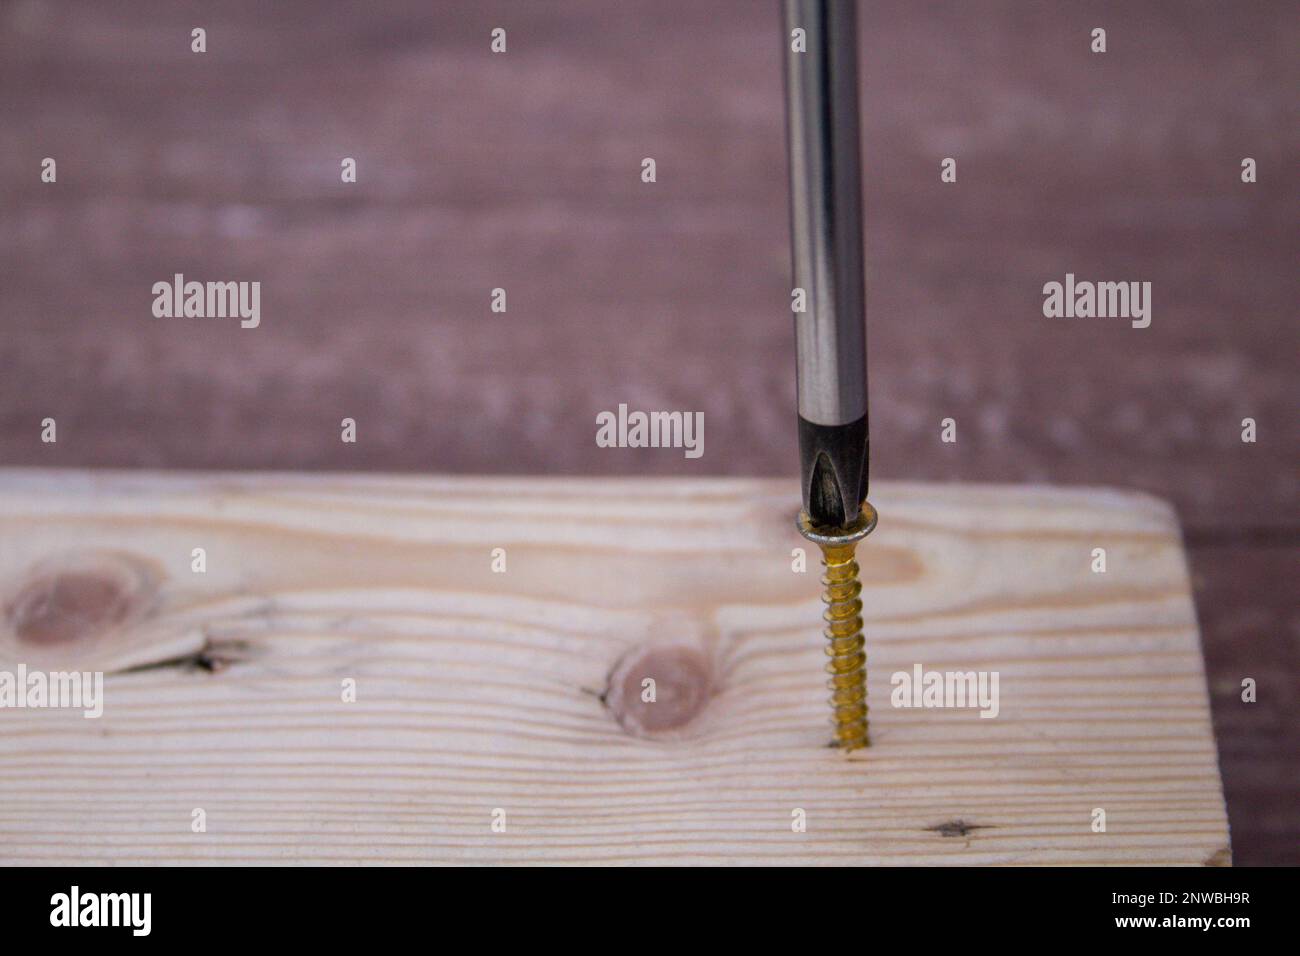 Image of the head of a screwdriver driving a screw into a piece of wood. Homemade DIY and crafts. Stock Photo